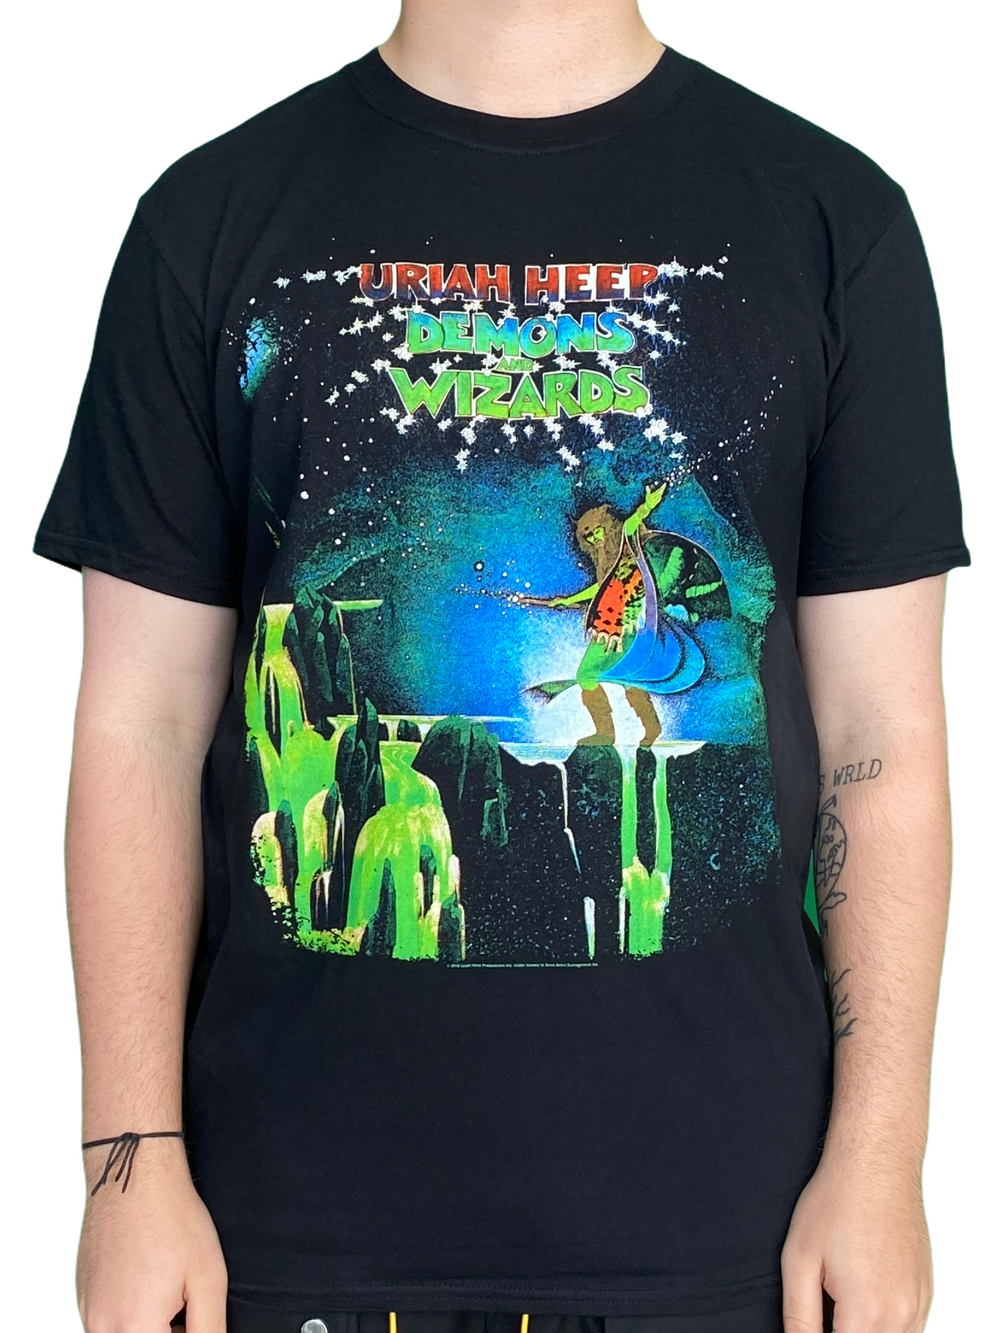 Uriah Heep Demons And Wizards Unisex Official T Shirt Brand New Various Sizes